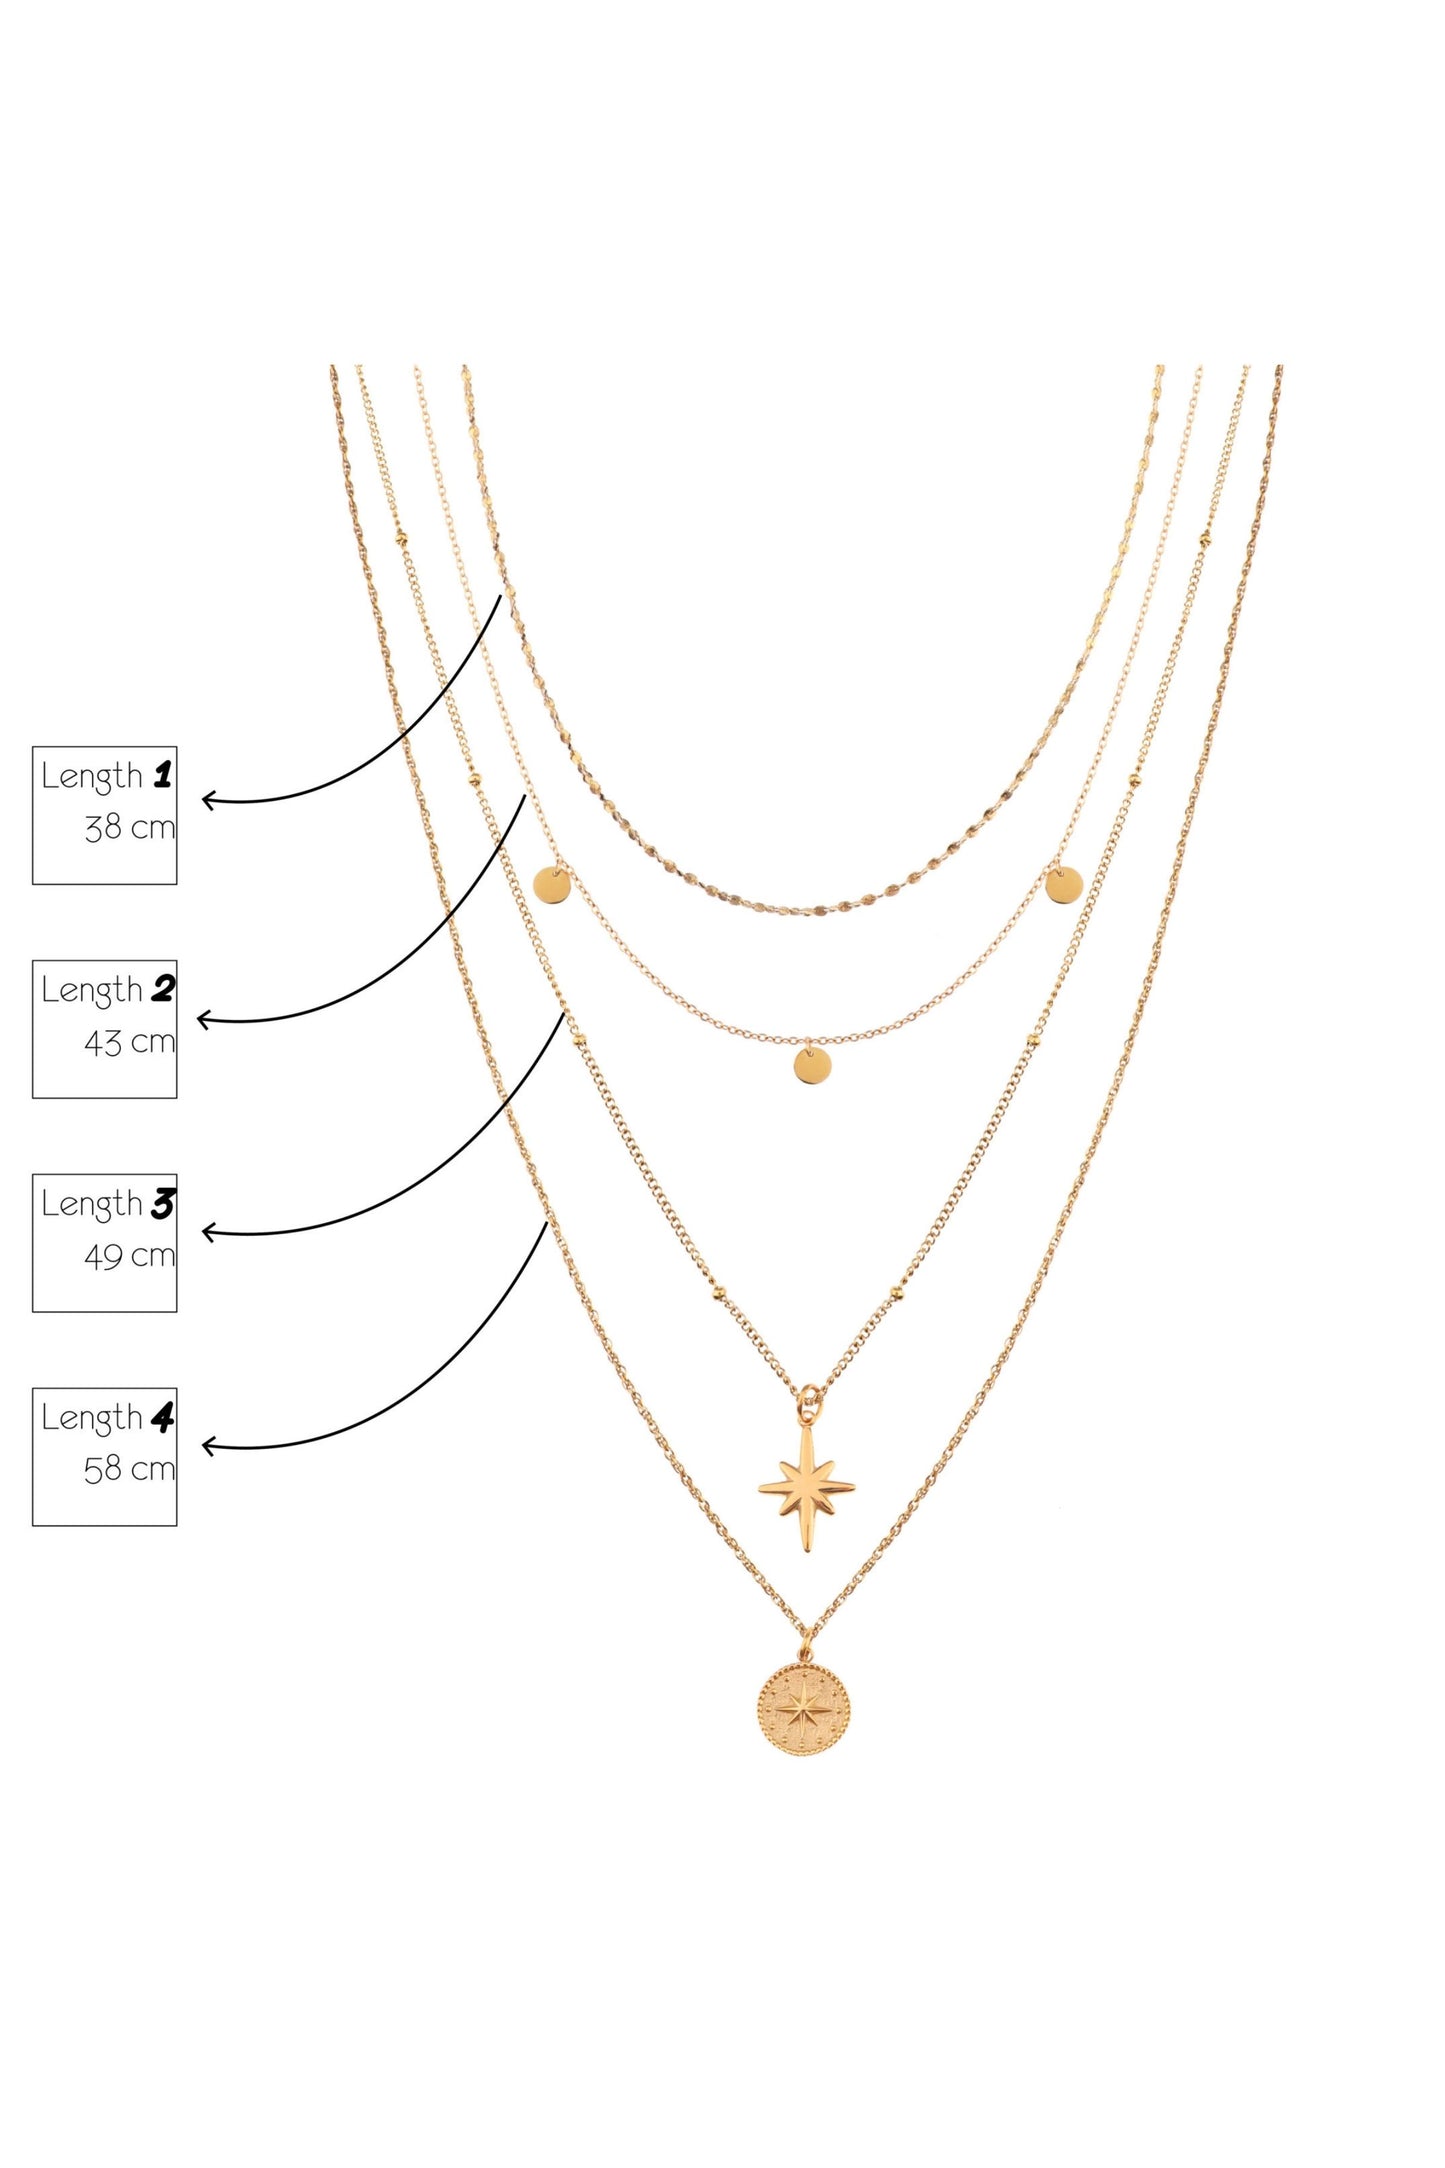 Baby Bloom Necklace - Gold